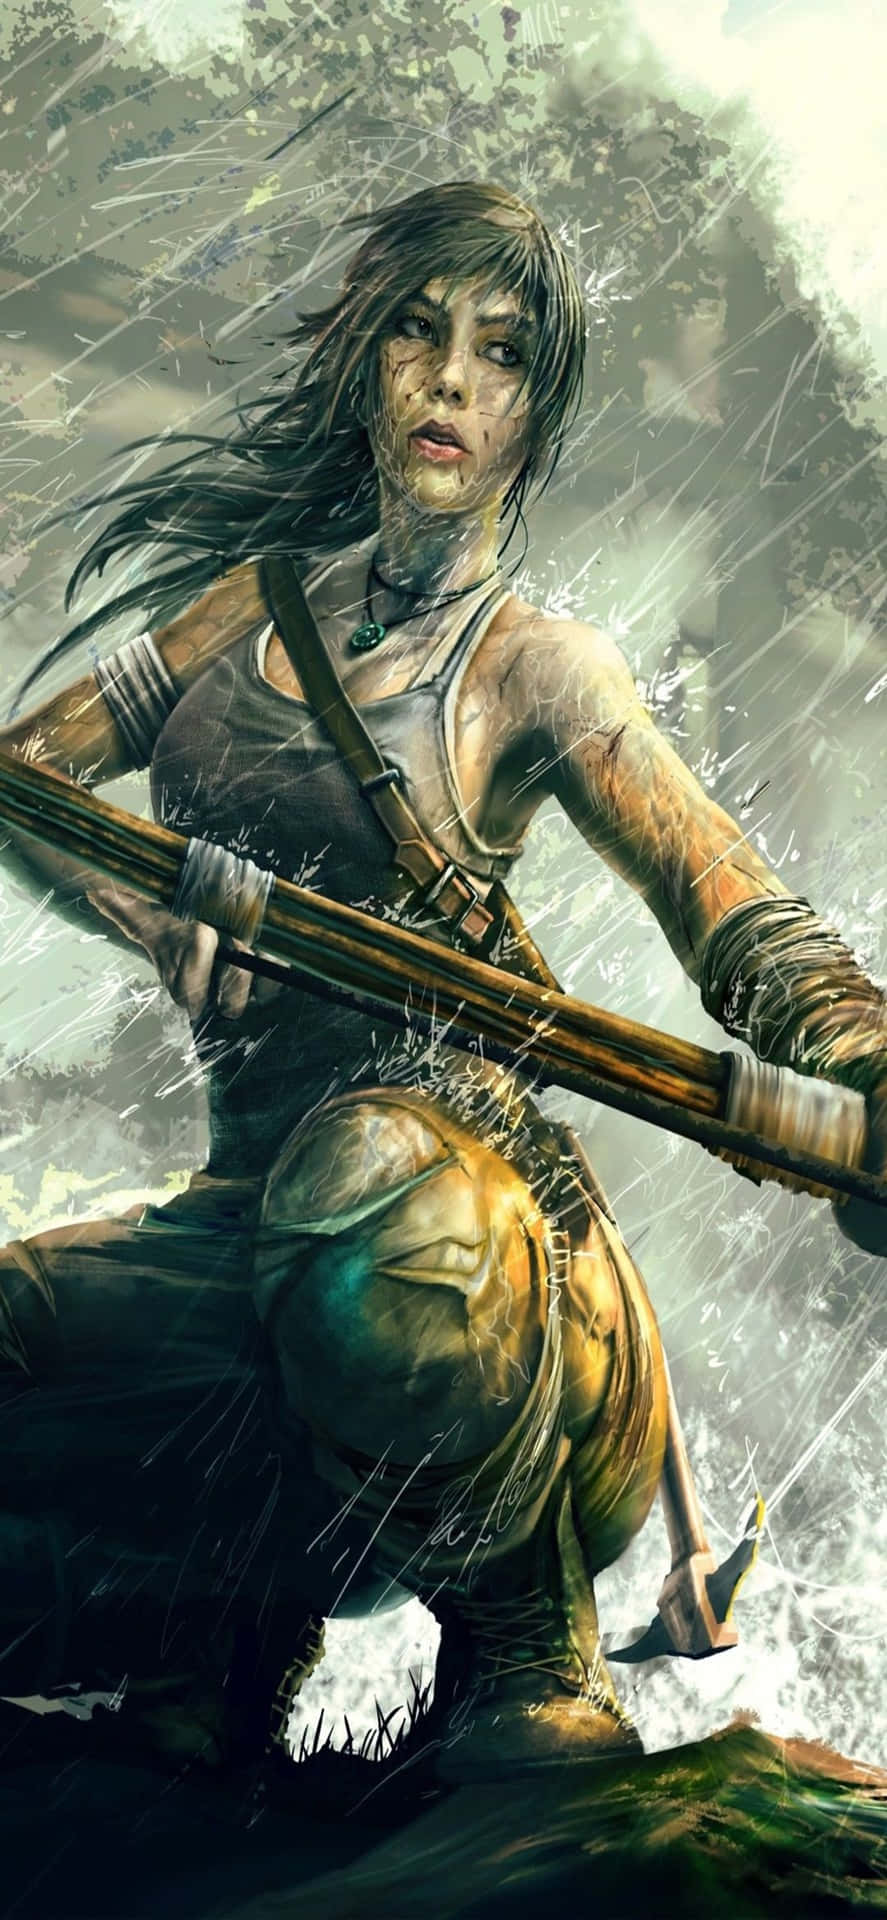 Uncover the mysteries of Lara Croft's thrilling adventure.